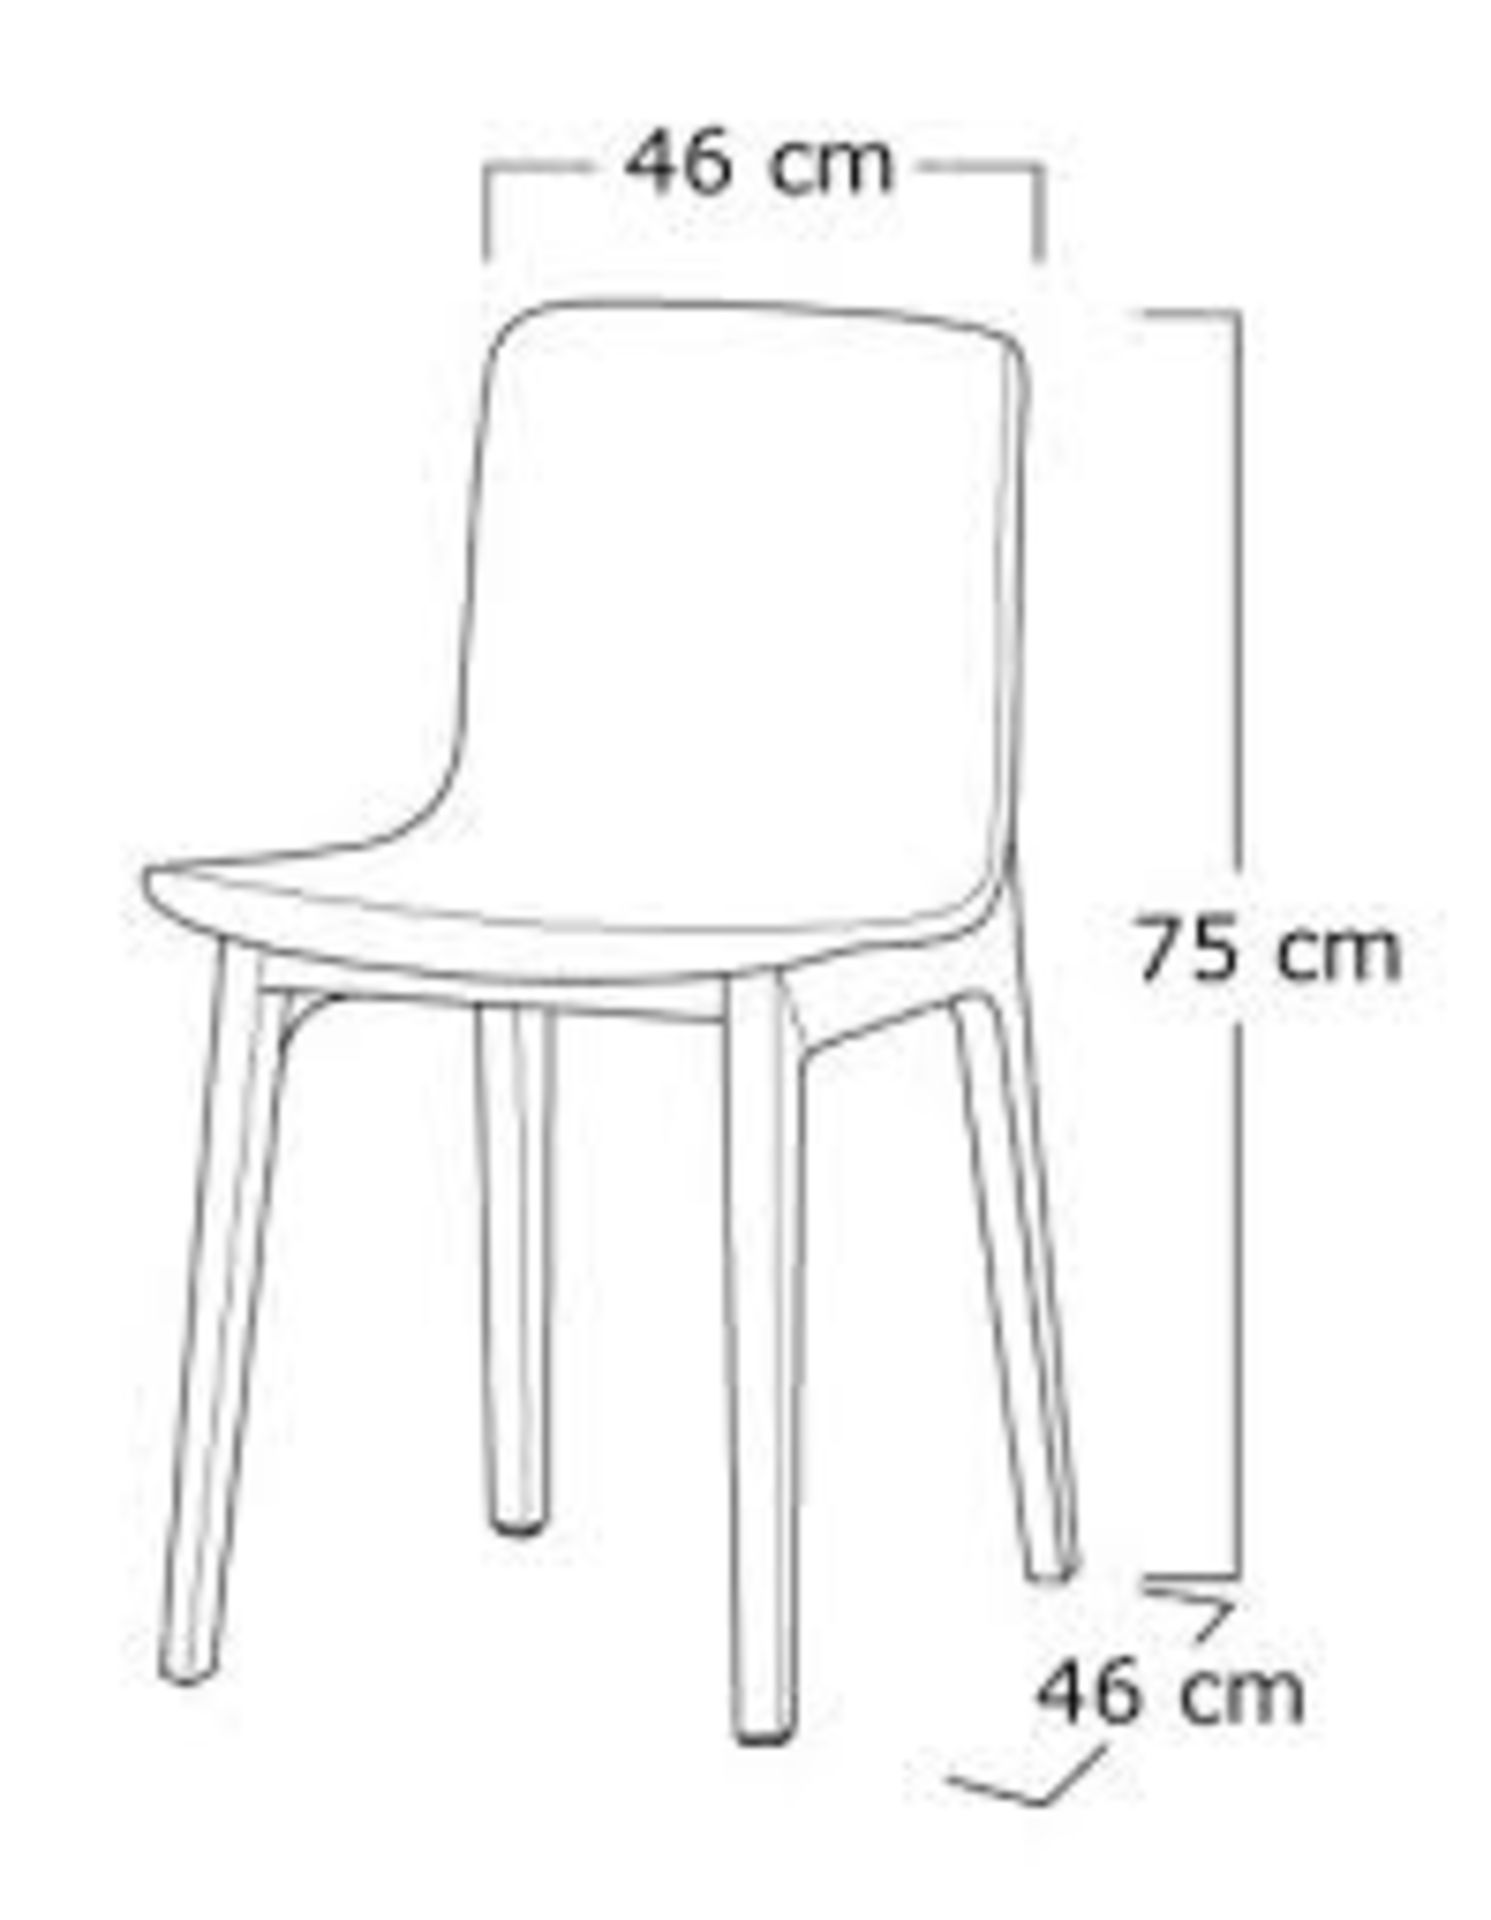 Set of 4 x Swift DC-782W Dining Chairs With White ABS Seats and Light Wood Bases - Dimensions H75 - Image 4 of 4